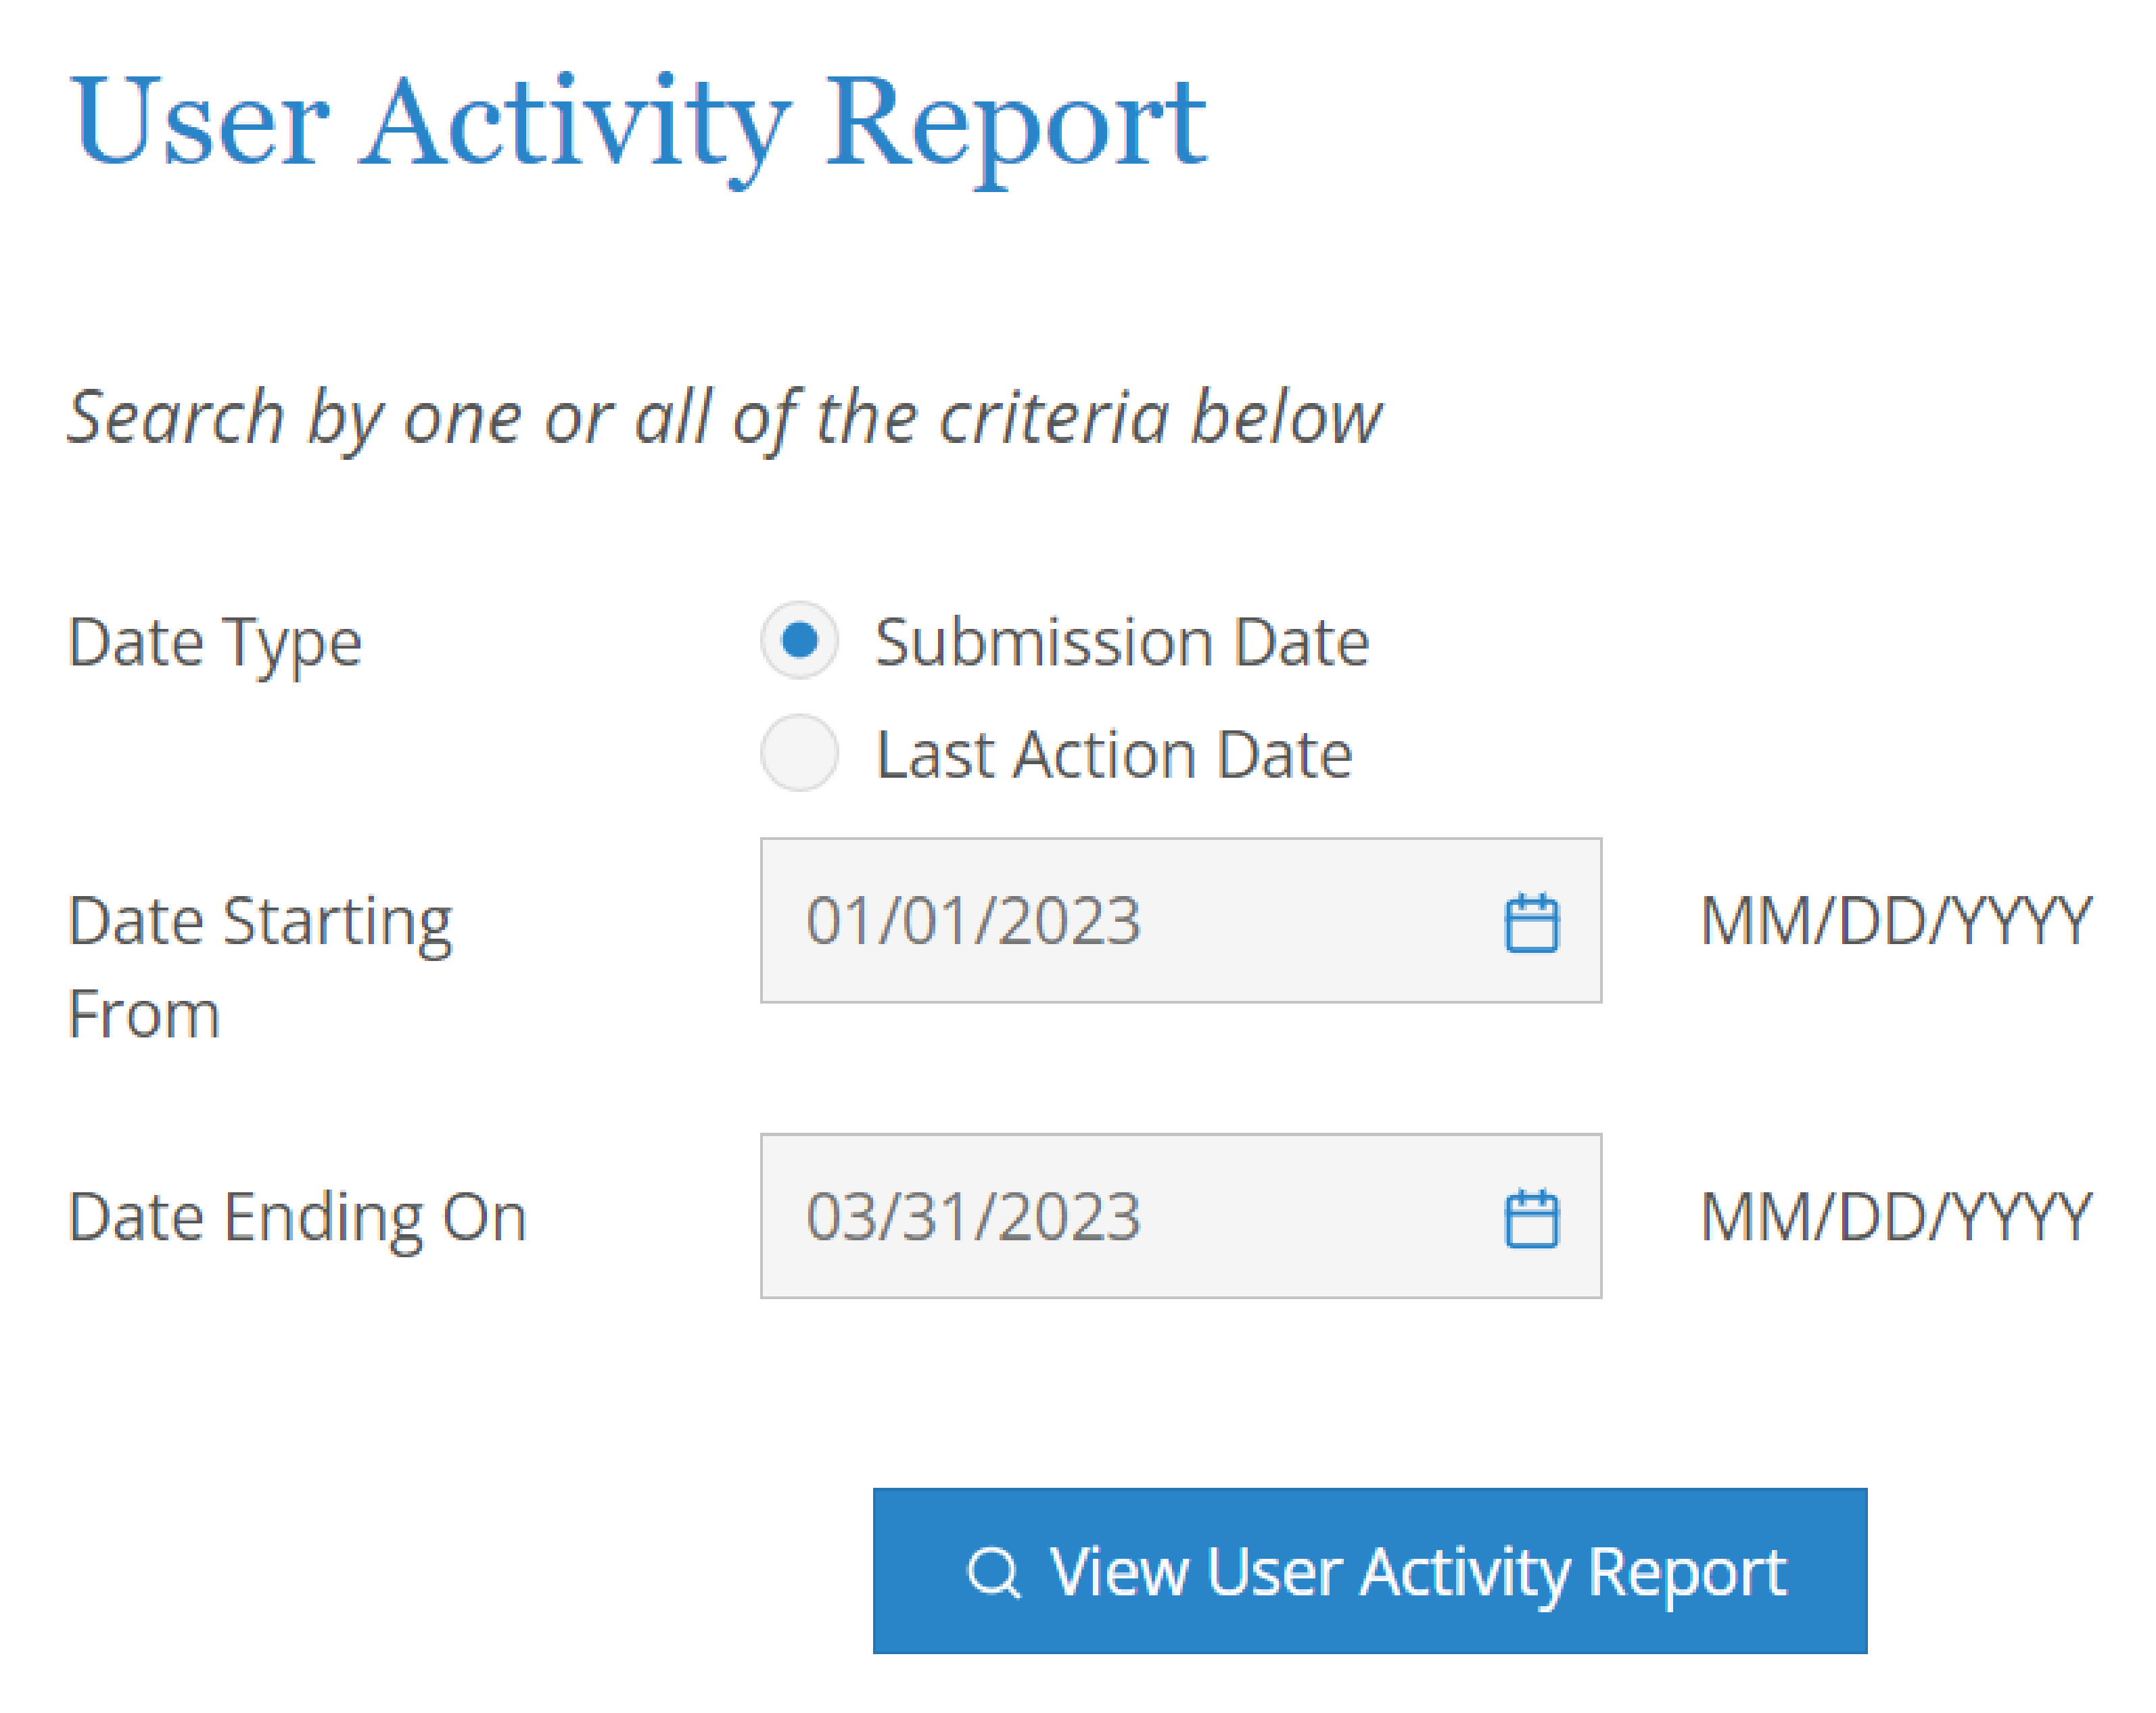 To generate a User Activity Report, select Date Type, enter date range, then click the View User Activity Report button.